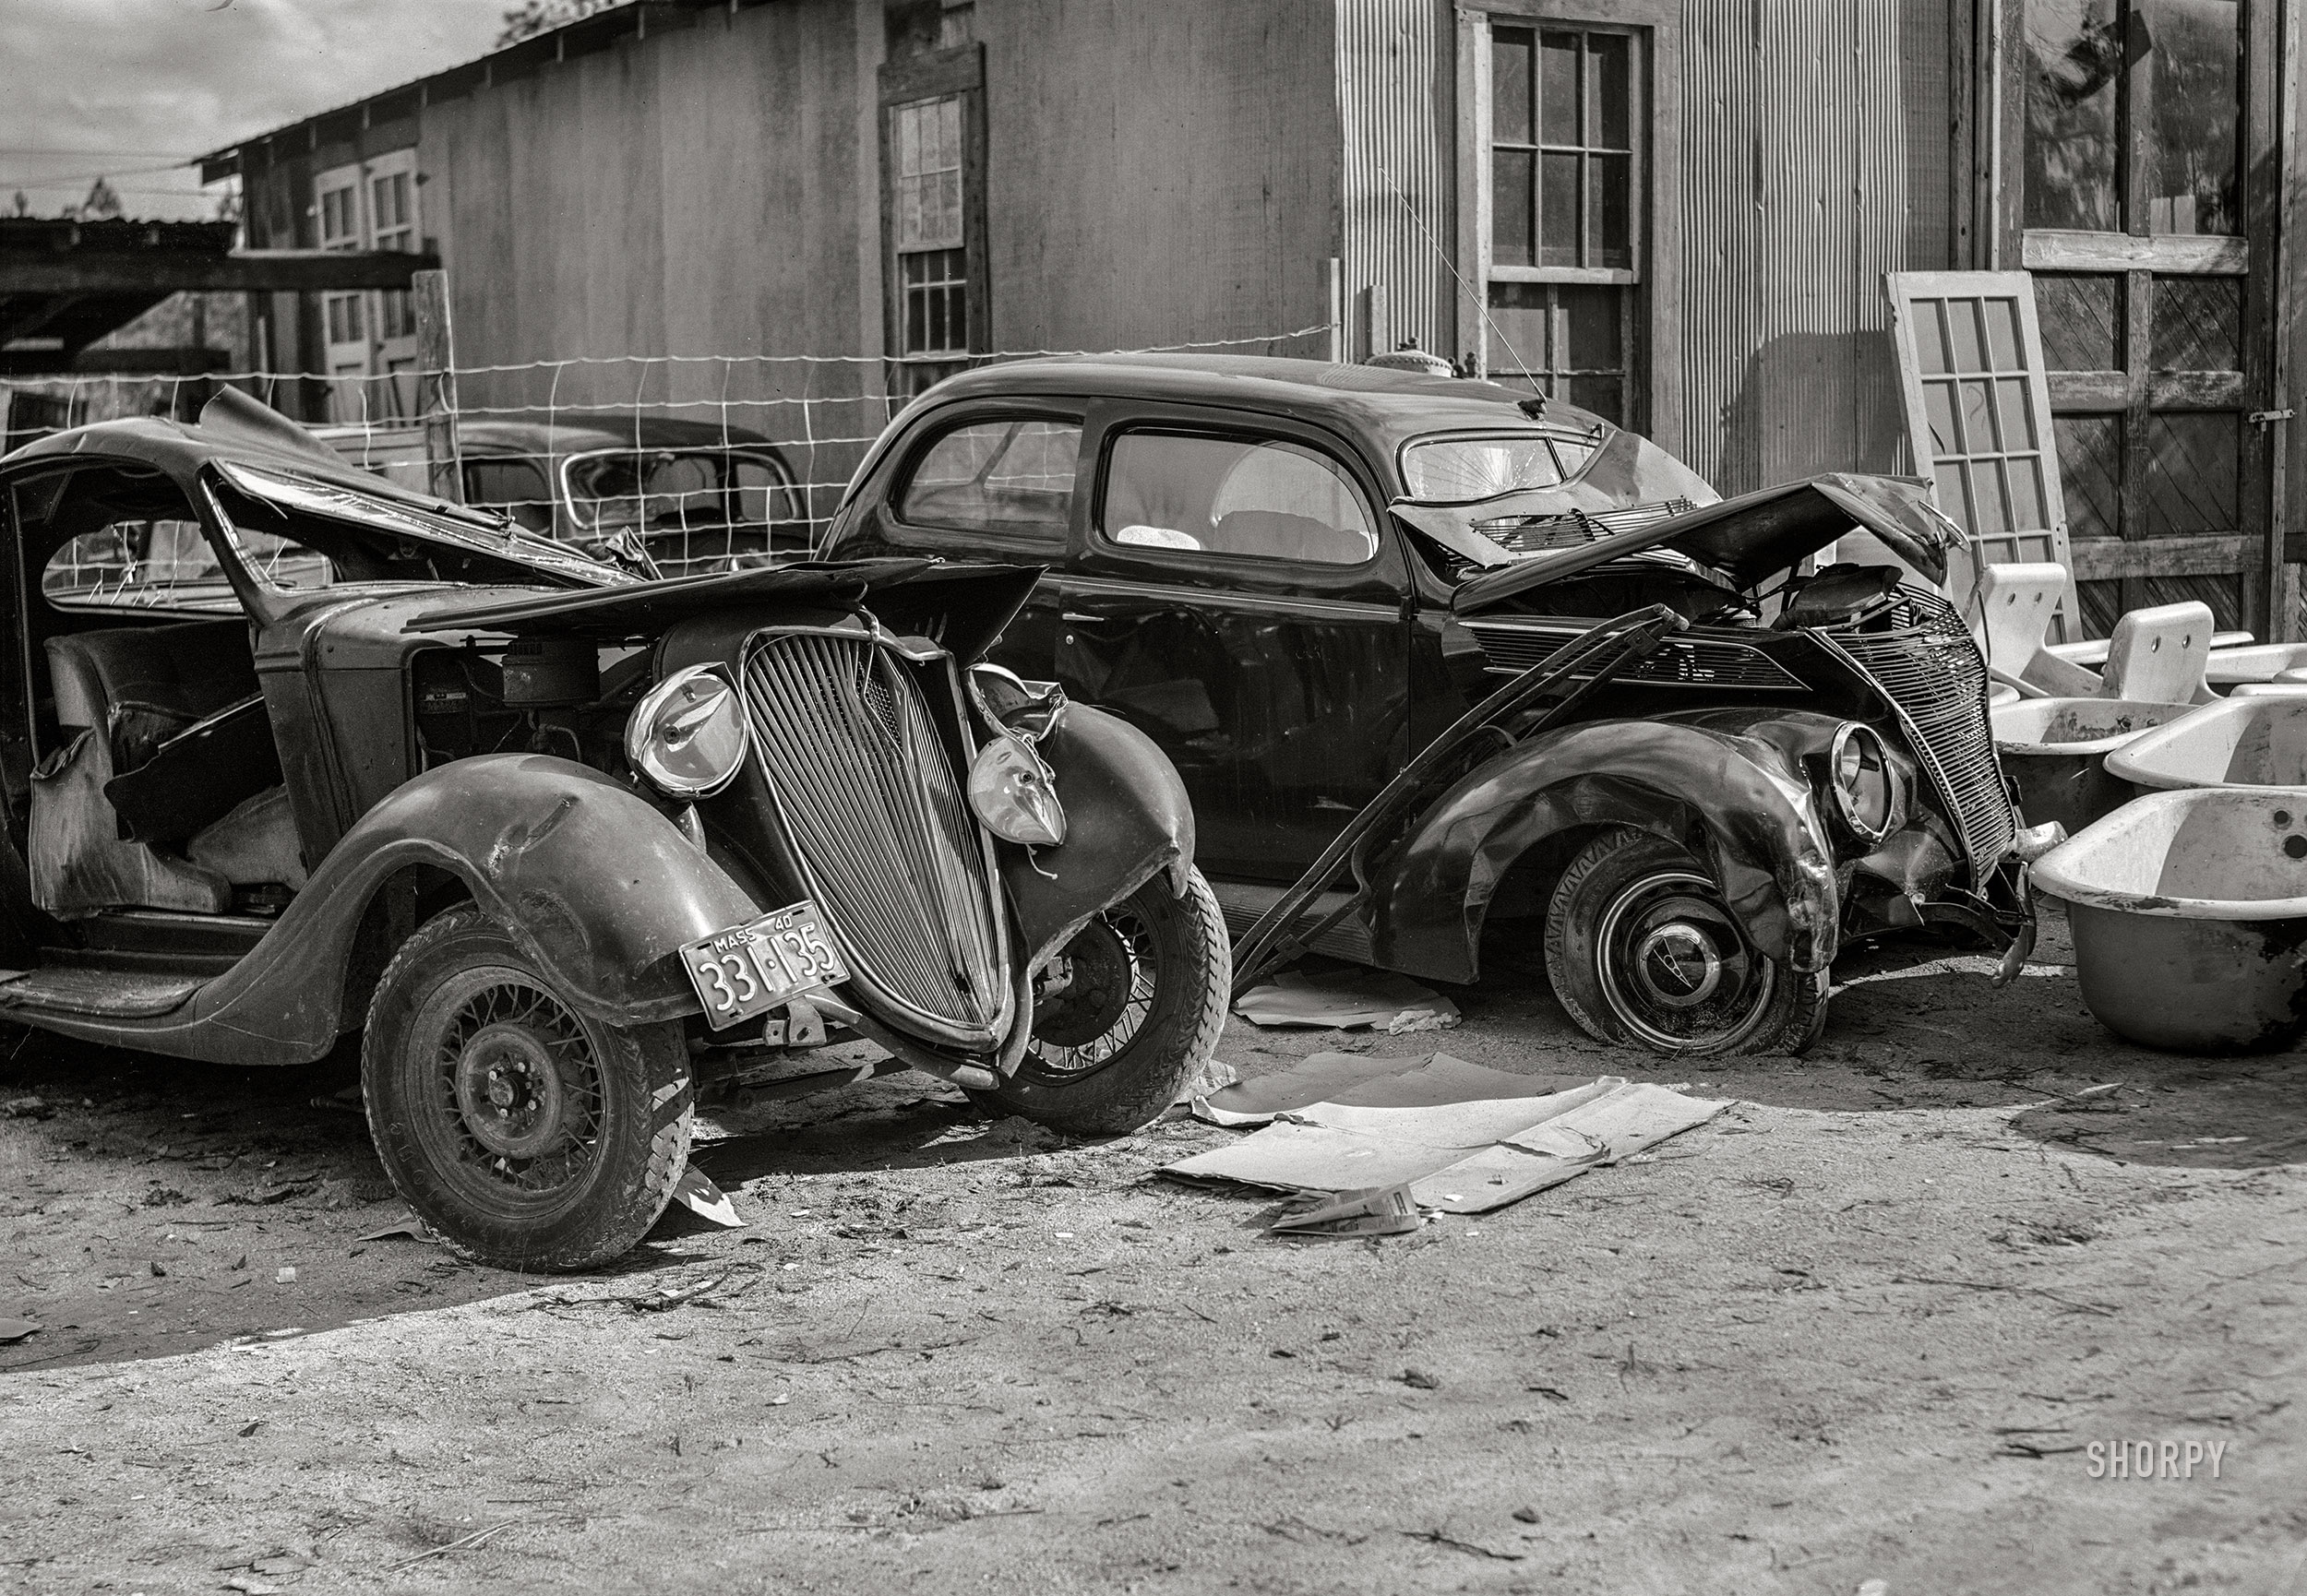 December 1940. "Wrecked cars of Camp Blanding construction workers. Starke, Florida." Medium format acetate negative by Marion Post Wolcott. View full size.